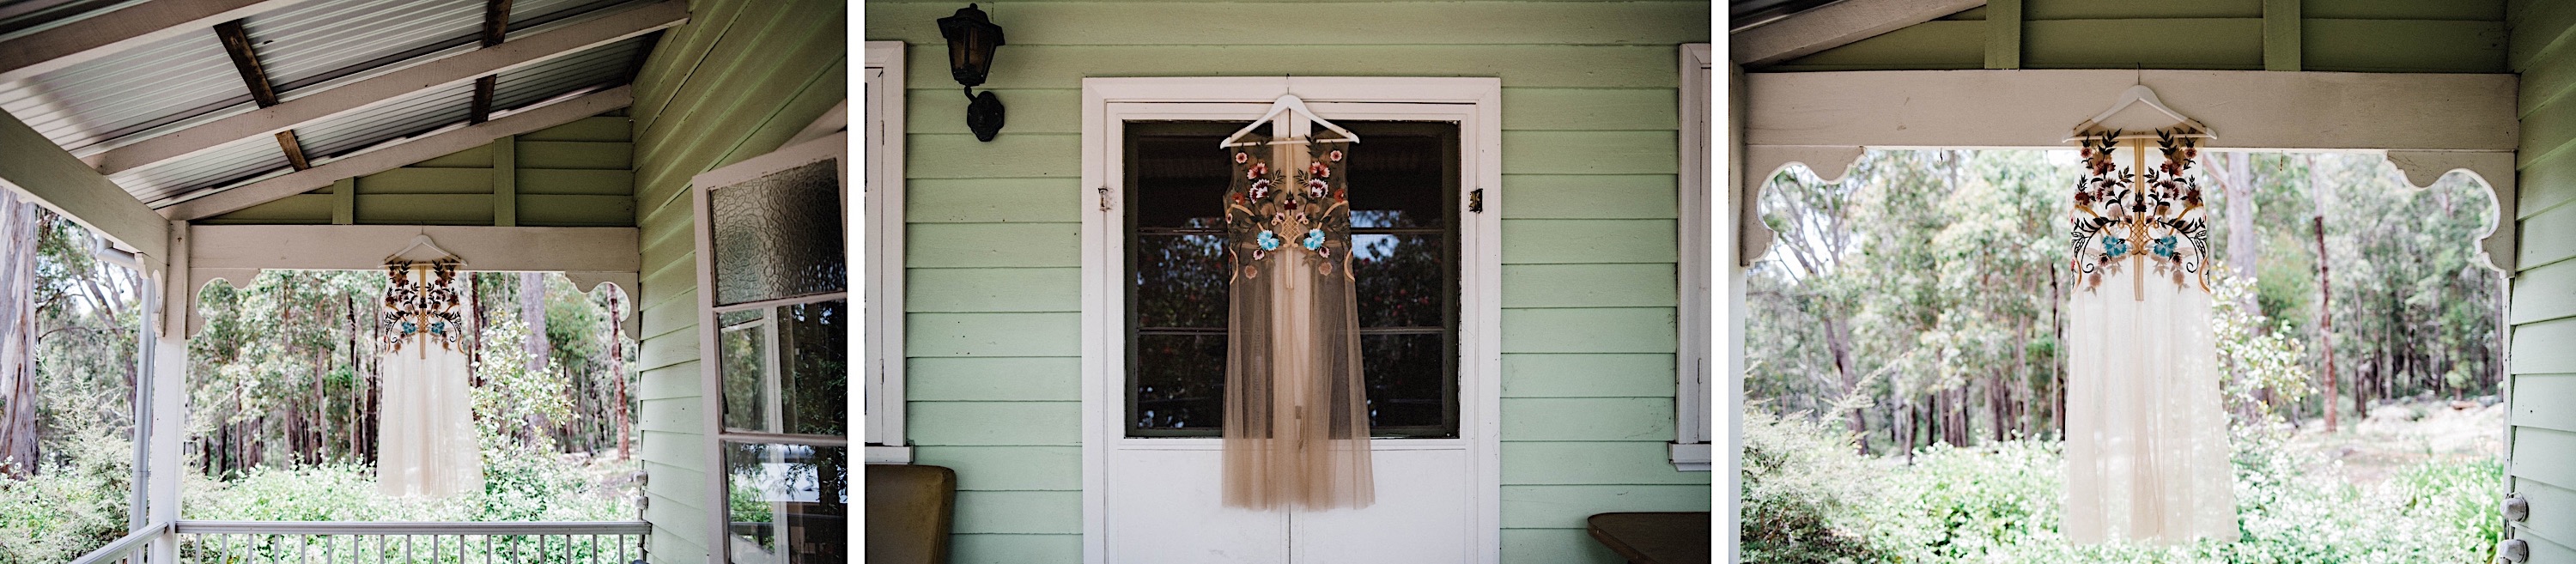 Three photos of a custom Harriette Gordon wedding dress with embroidery hanging against green backgrounds.